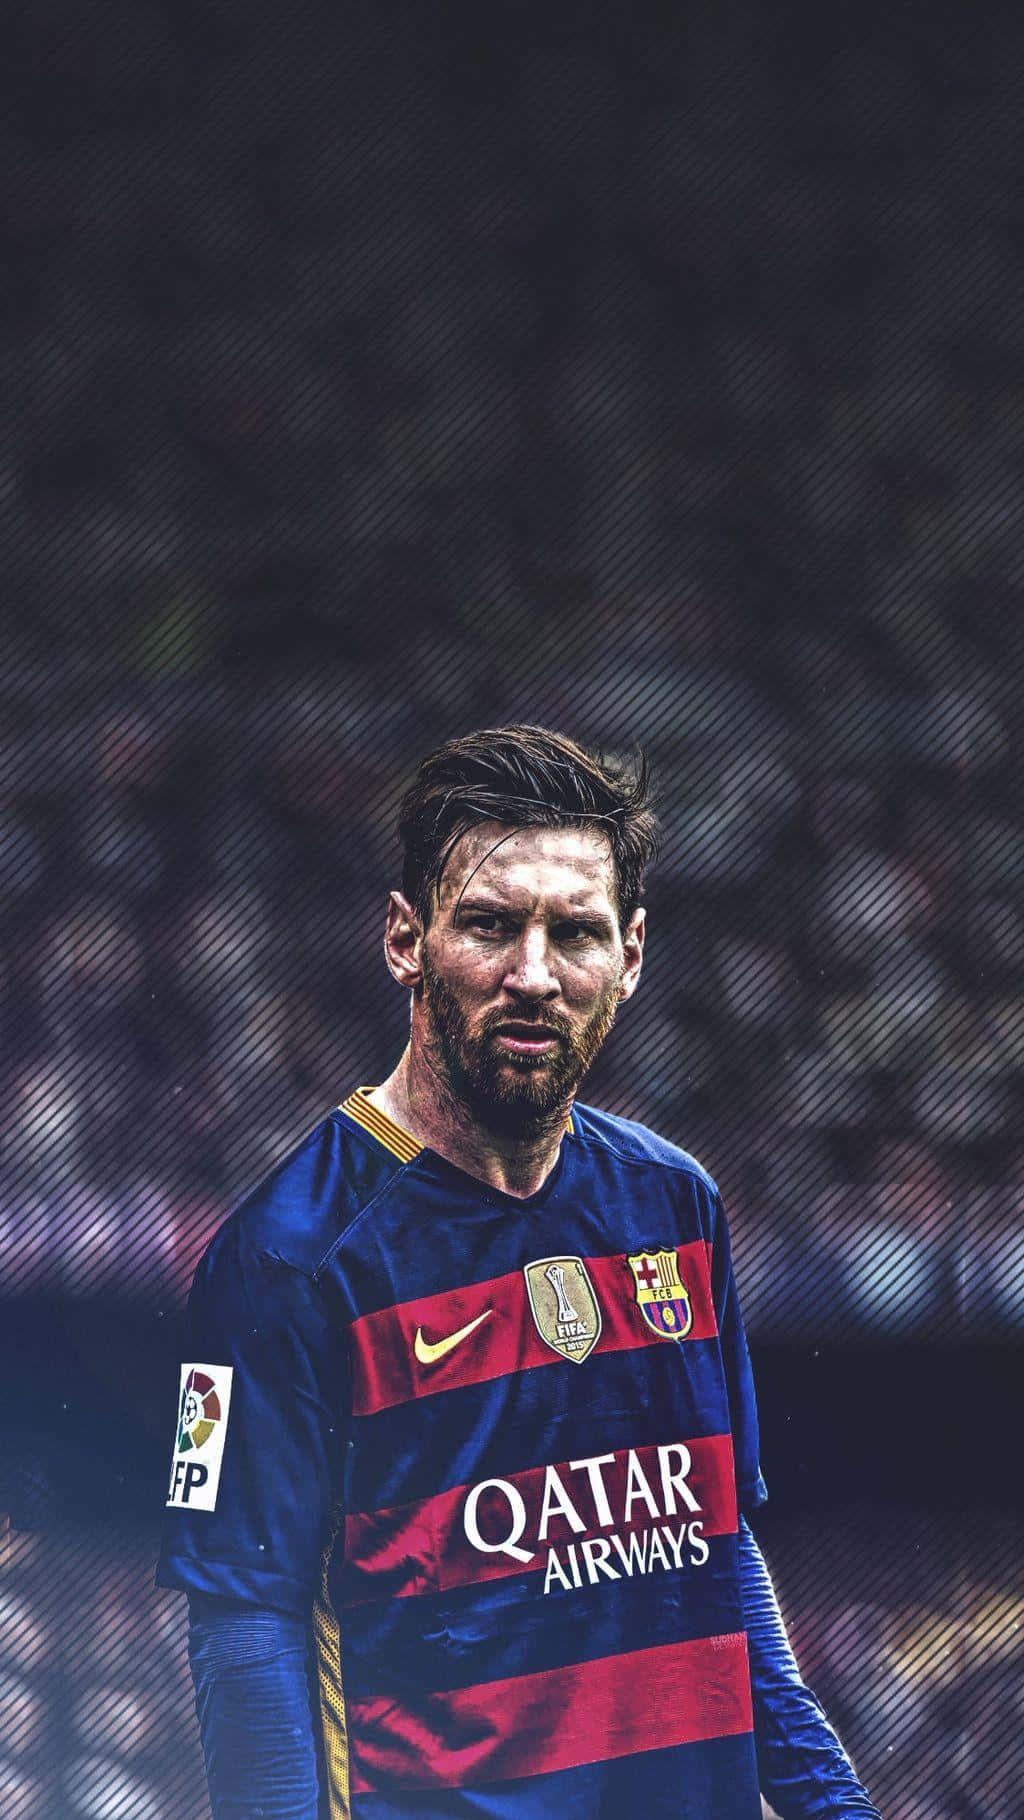 Download Lionel Messi The Worlds Greatest Soccer Player In His